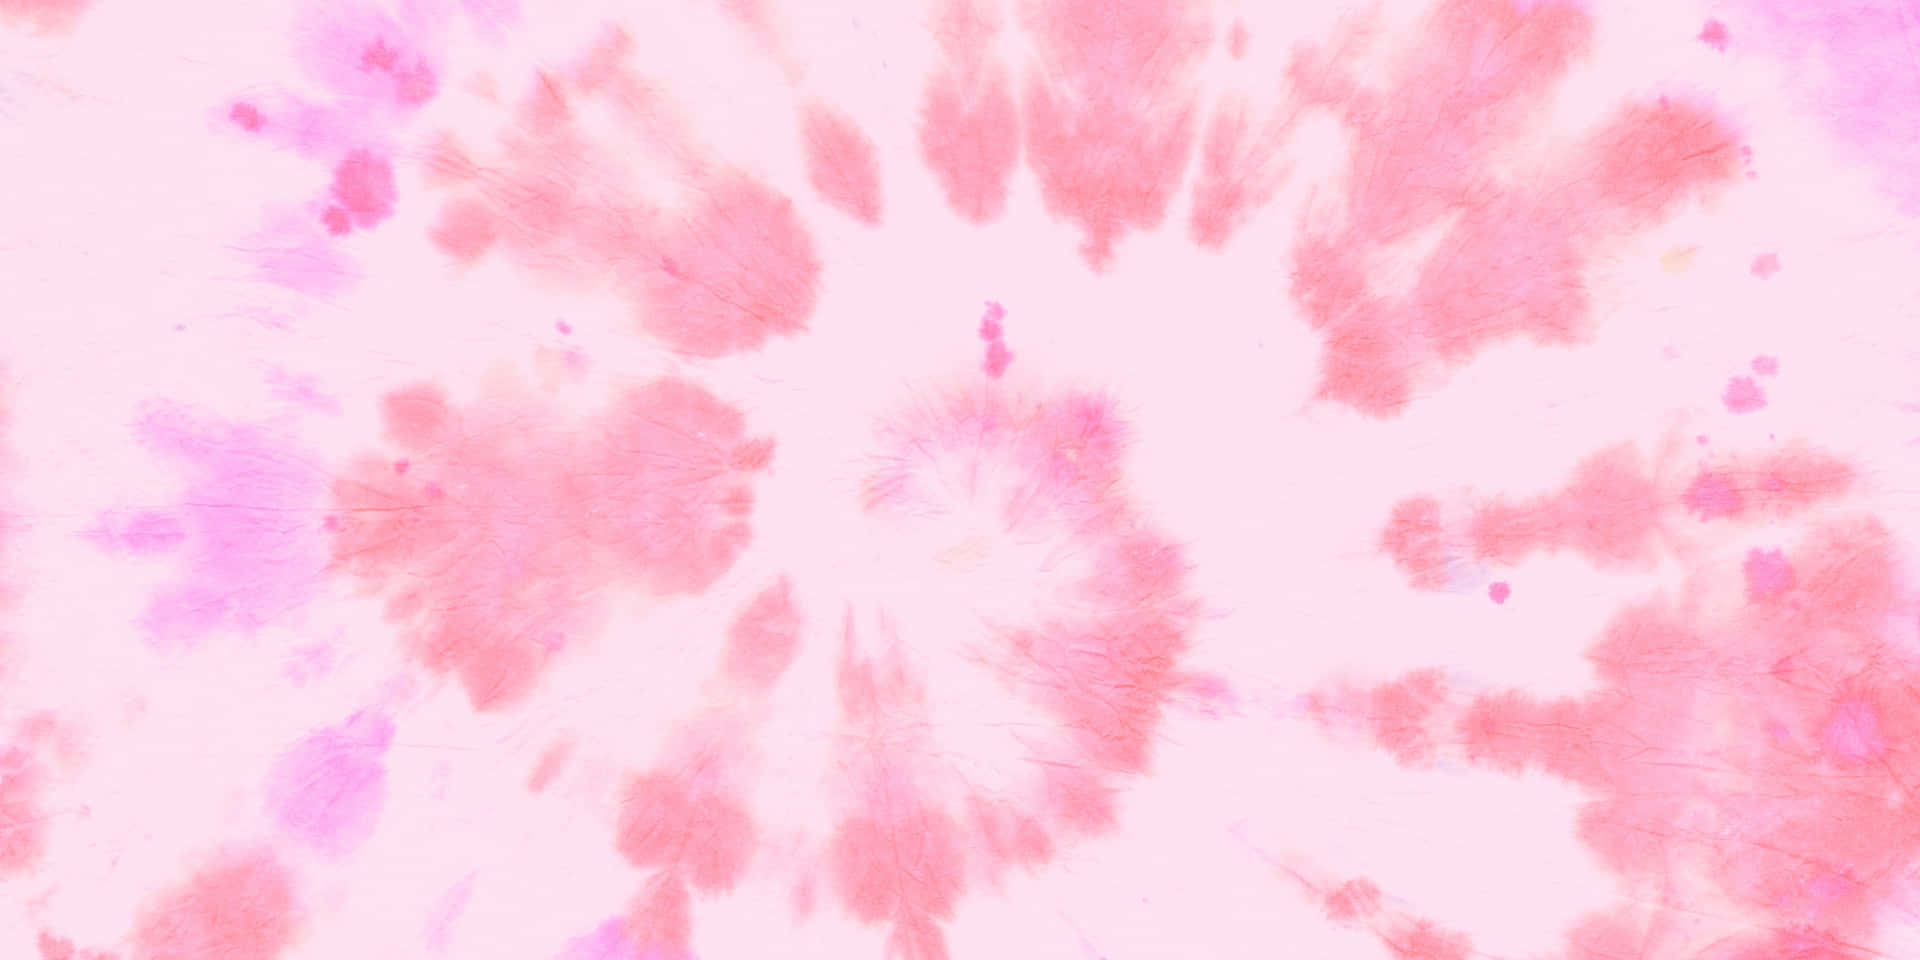 A vibrant pink tie-dye background.